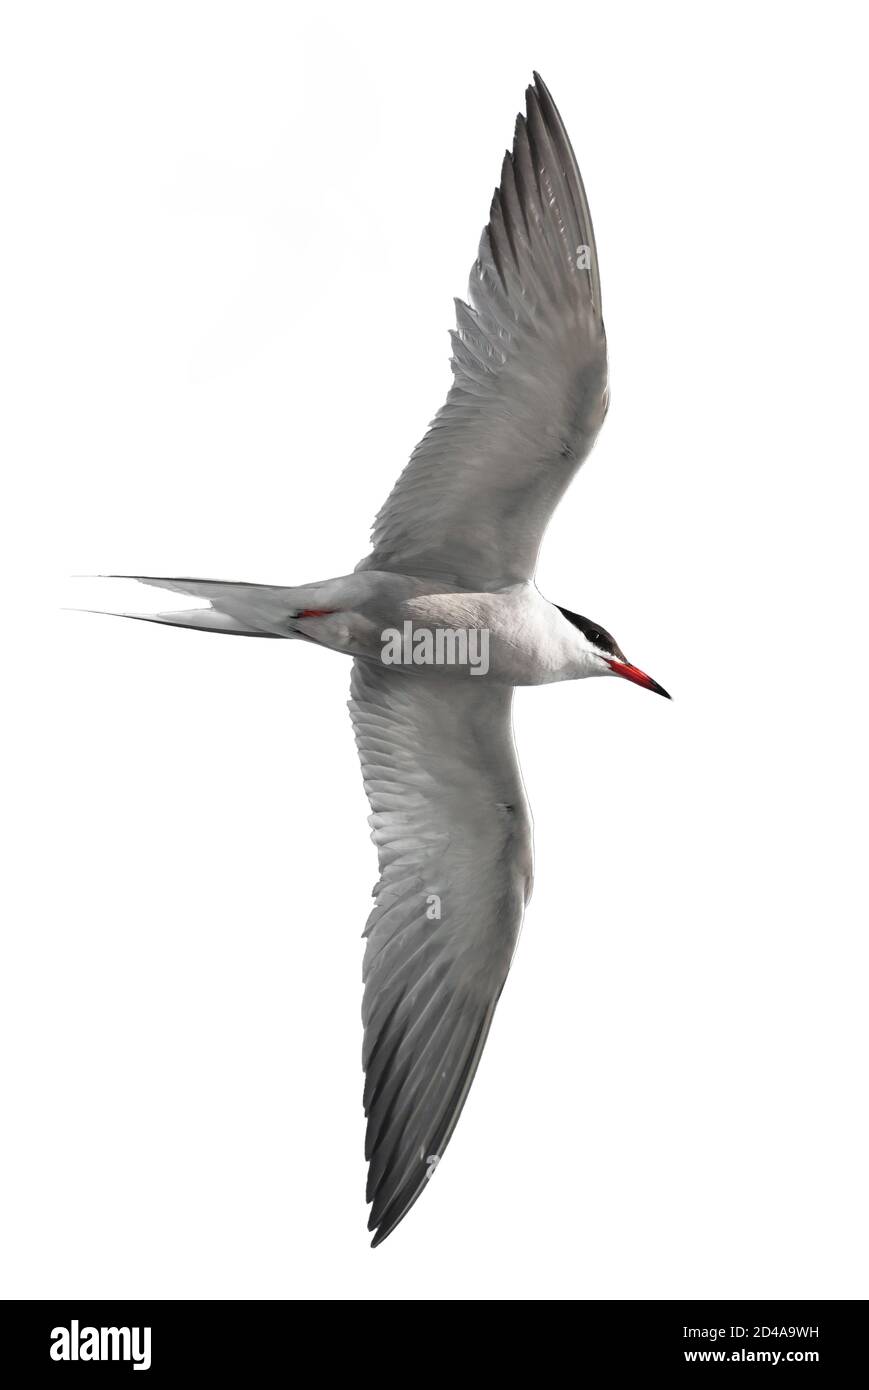 Adult common tern in flight. Isolated on white background. Close up. Scientific name: Sterna hirundo Stock Photo